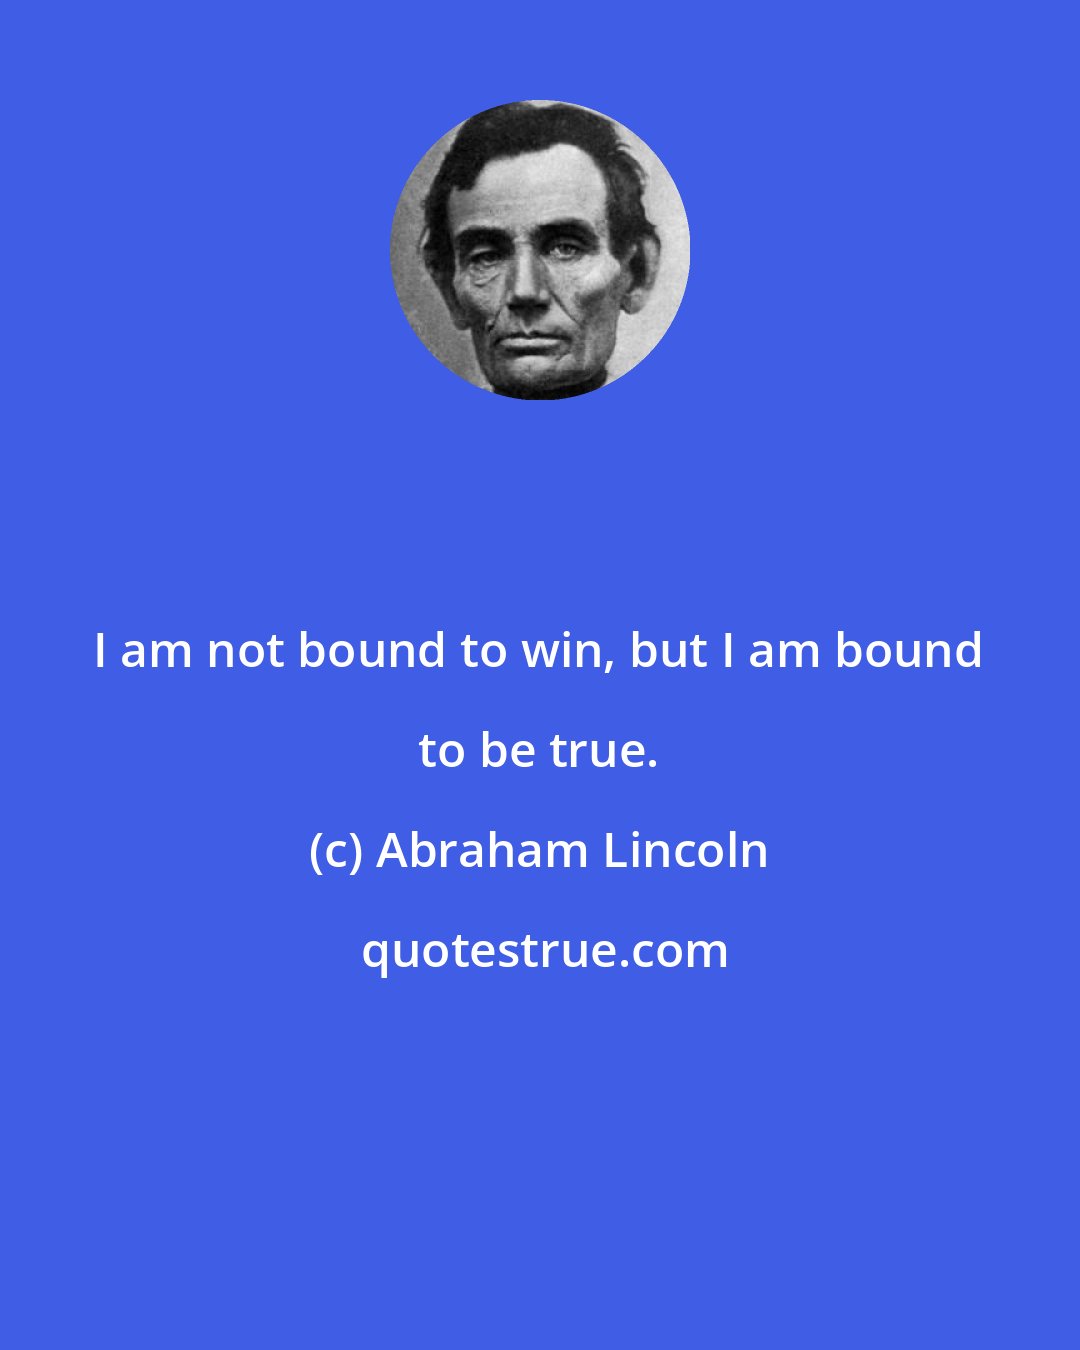 Abraham Lincoln: I am not bound to win, but I am bound to be true.